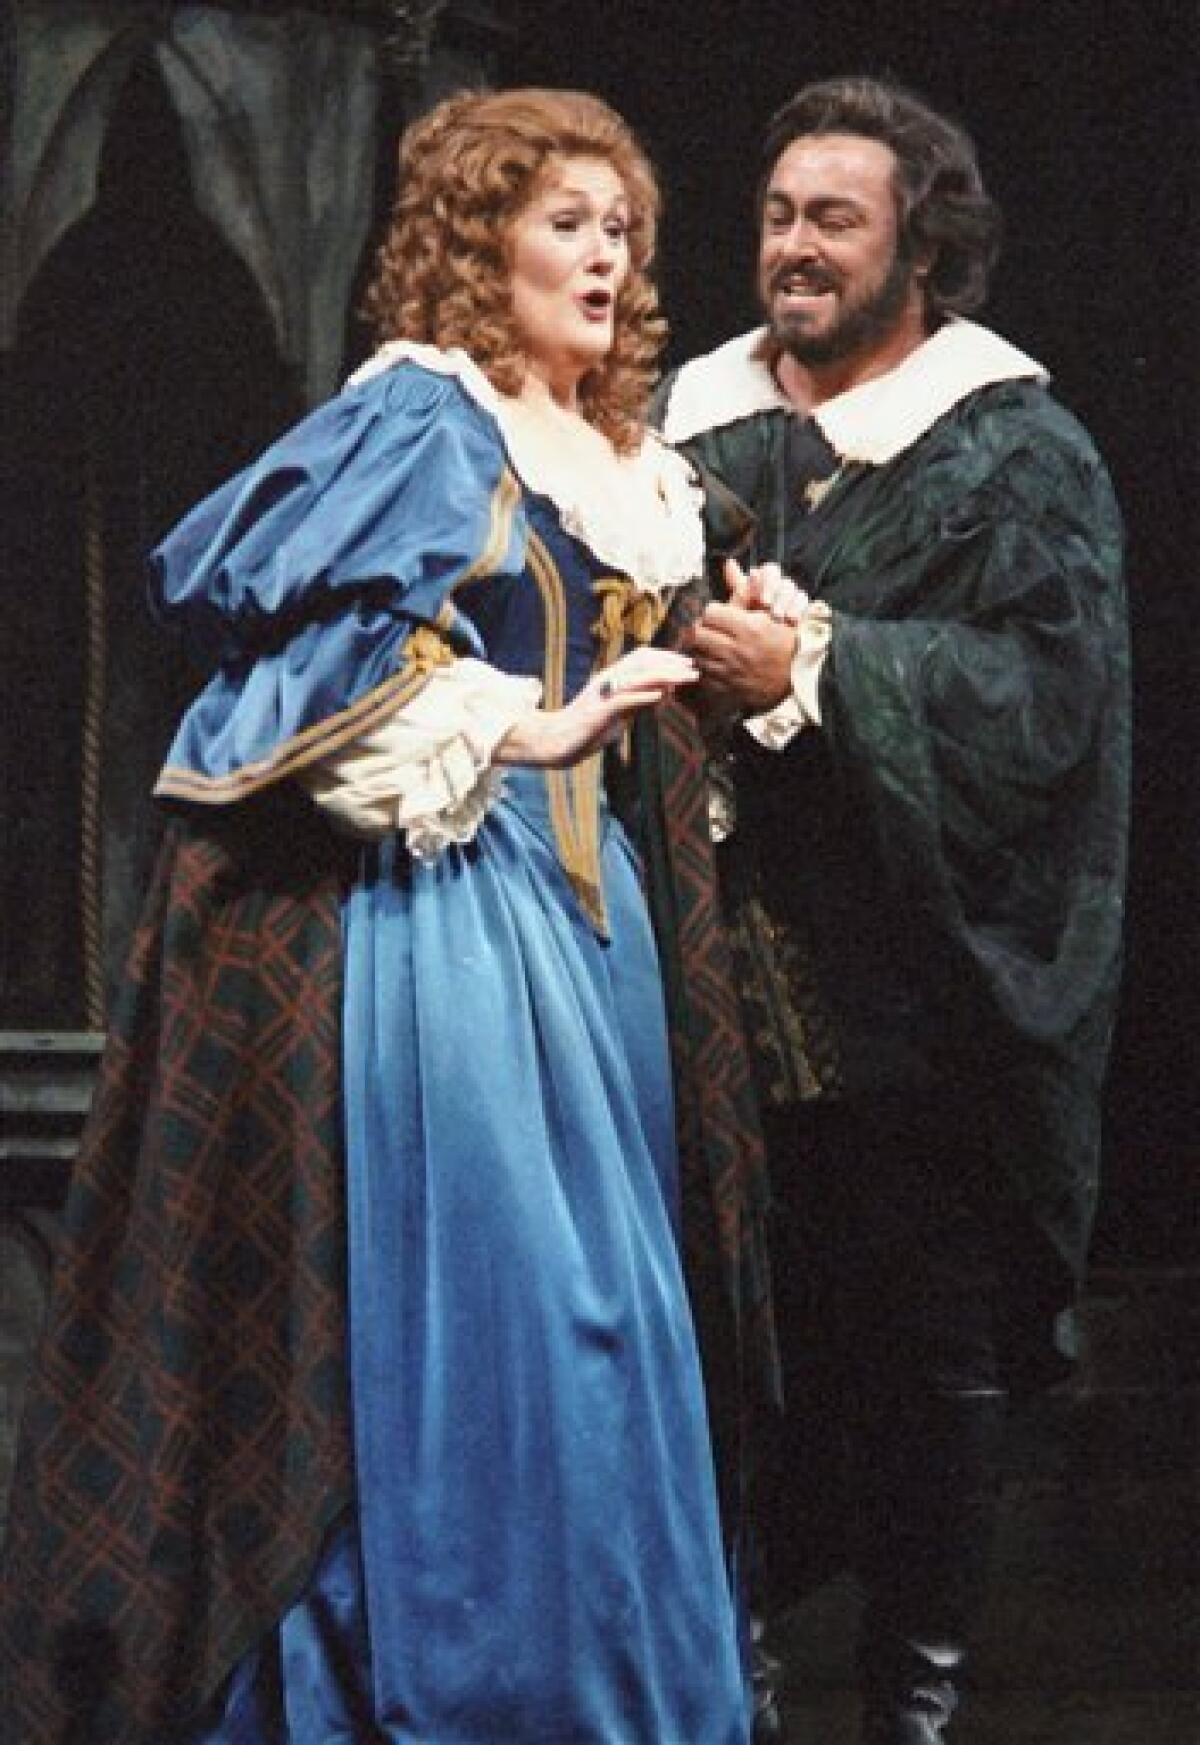 FILE - In this Friday, Jan. 10, 1987 file picture, Dame Joan Sutherland, left, and Luciano Pavarotti sing a scene from Gaetano Donizetti's opera Lucia di Lammermoor at the Metropolitan Opera in New York. Sutherland, a former small town secretarial school student whose mastery of tone, astonishing range and vocal control vaulted her into the top echelons of opera, died Sunday, Oct. 10, 2010 at 83. (AP Photo/Osamu Honda, File)